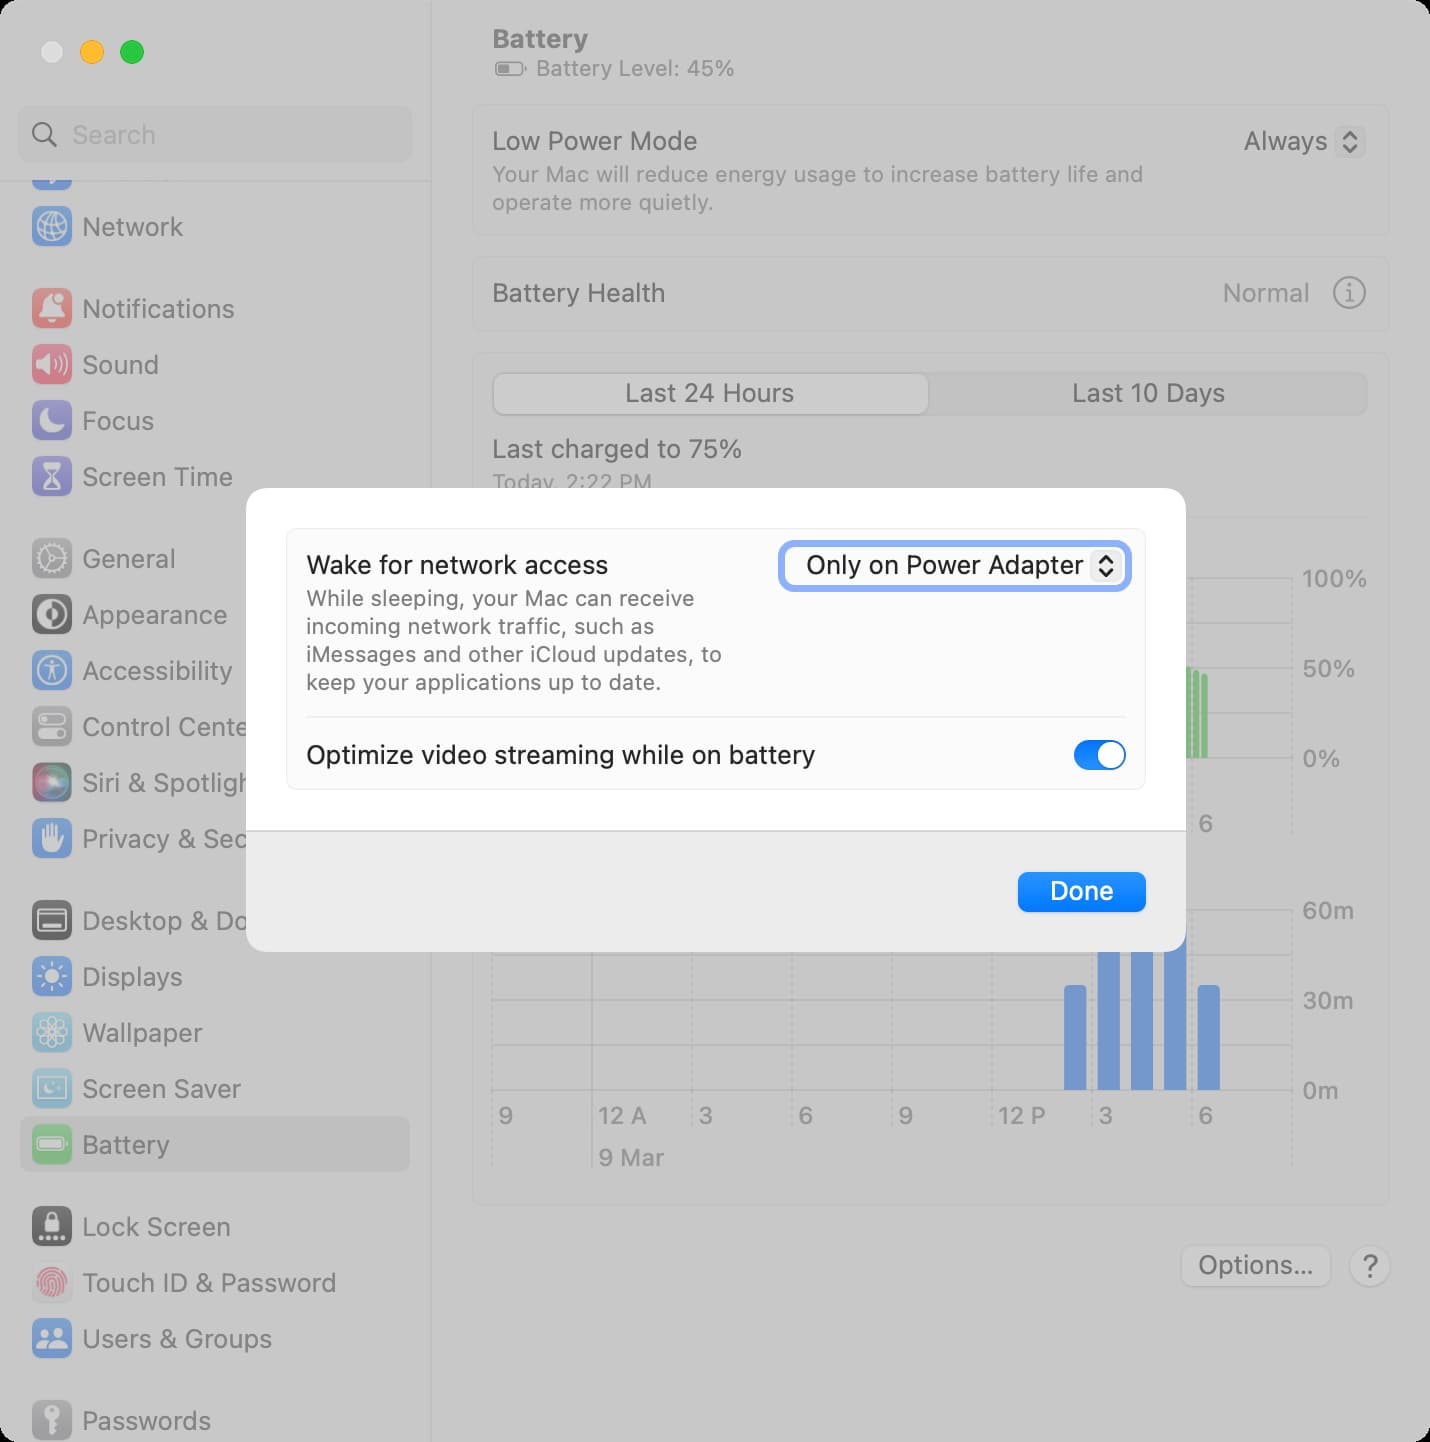 Wake for network access in MacBook's battery settings